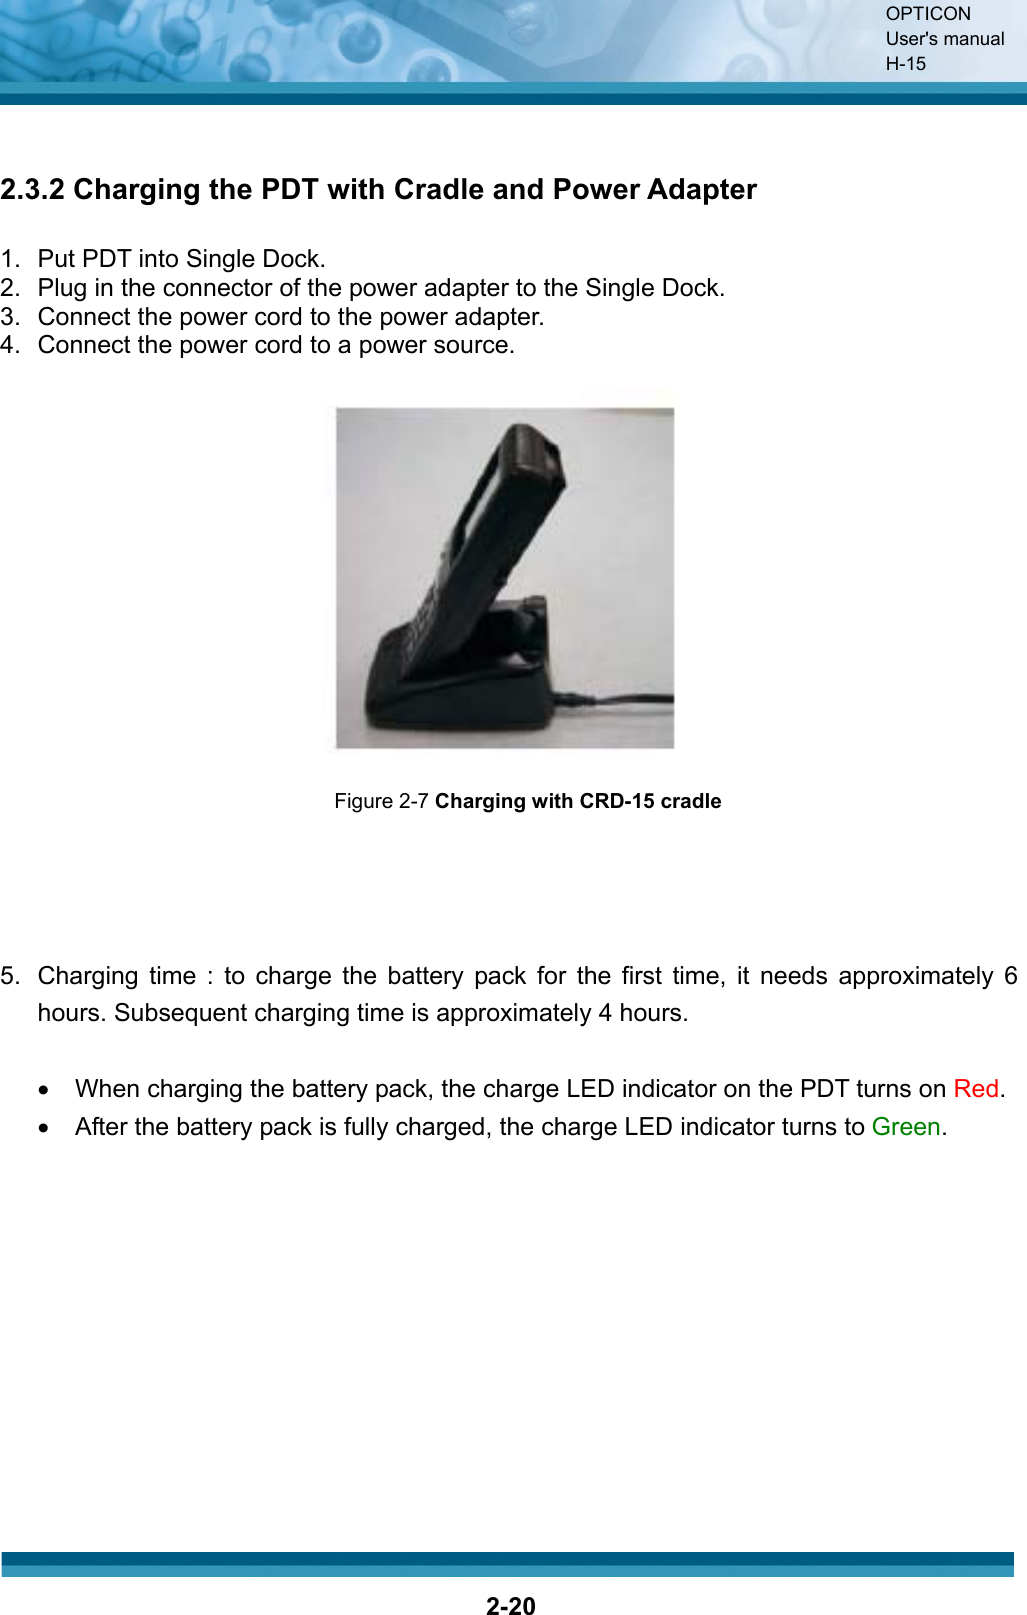 OPTICON User&apos;s manual H-152-202.3.2 Charging the PDT with Cradle and Power Adapter 1.  Put PDT into Single Dock. 2.  Plug in the connector of the power adapter to the Single Dock. 3.  Connect the power cord to the power adapter. 4.  Connect the power cord to a power source. Figure 2-7 Charging with CRD-15 cradle5.  Charging time : to charge the battery pack for the first time, it needs approximately 6hours. Subsequent charging time is approximately 4 hours.   x  When charging the battery pack, the charge LED indicator on the PDT turns on Red.x  After the battery pack is fully charged, the charge LED indicator turns to Green.